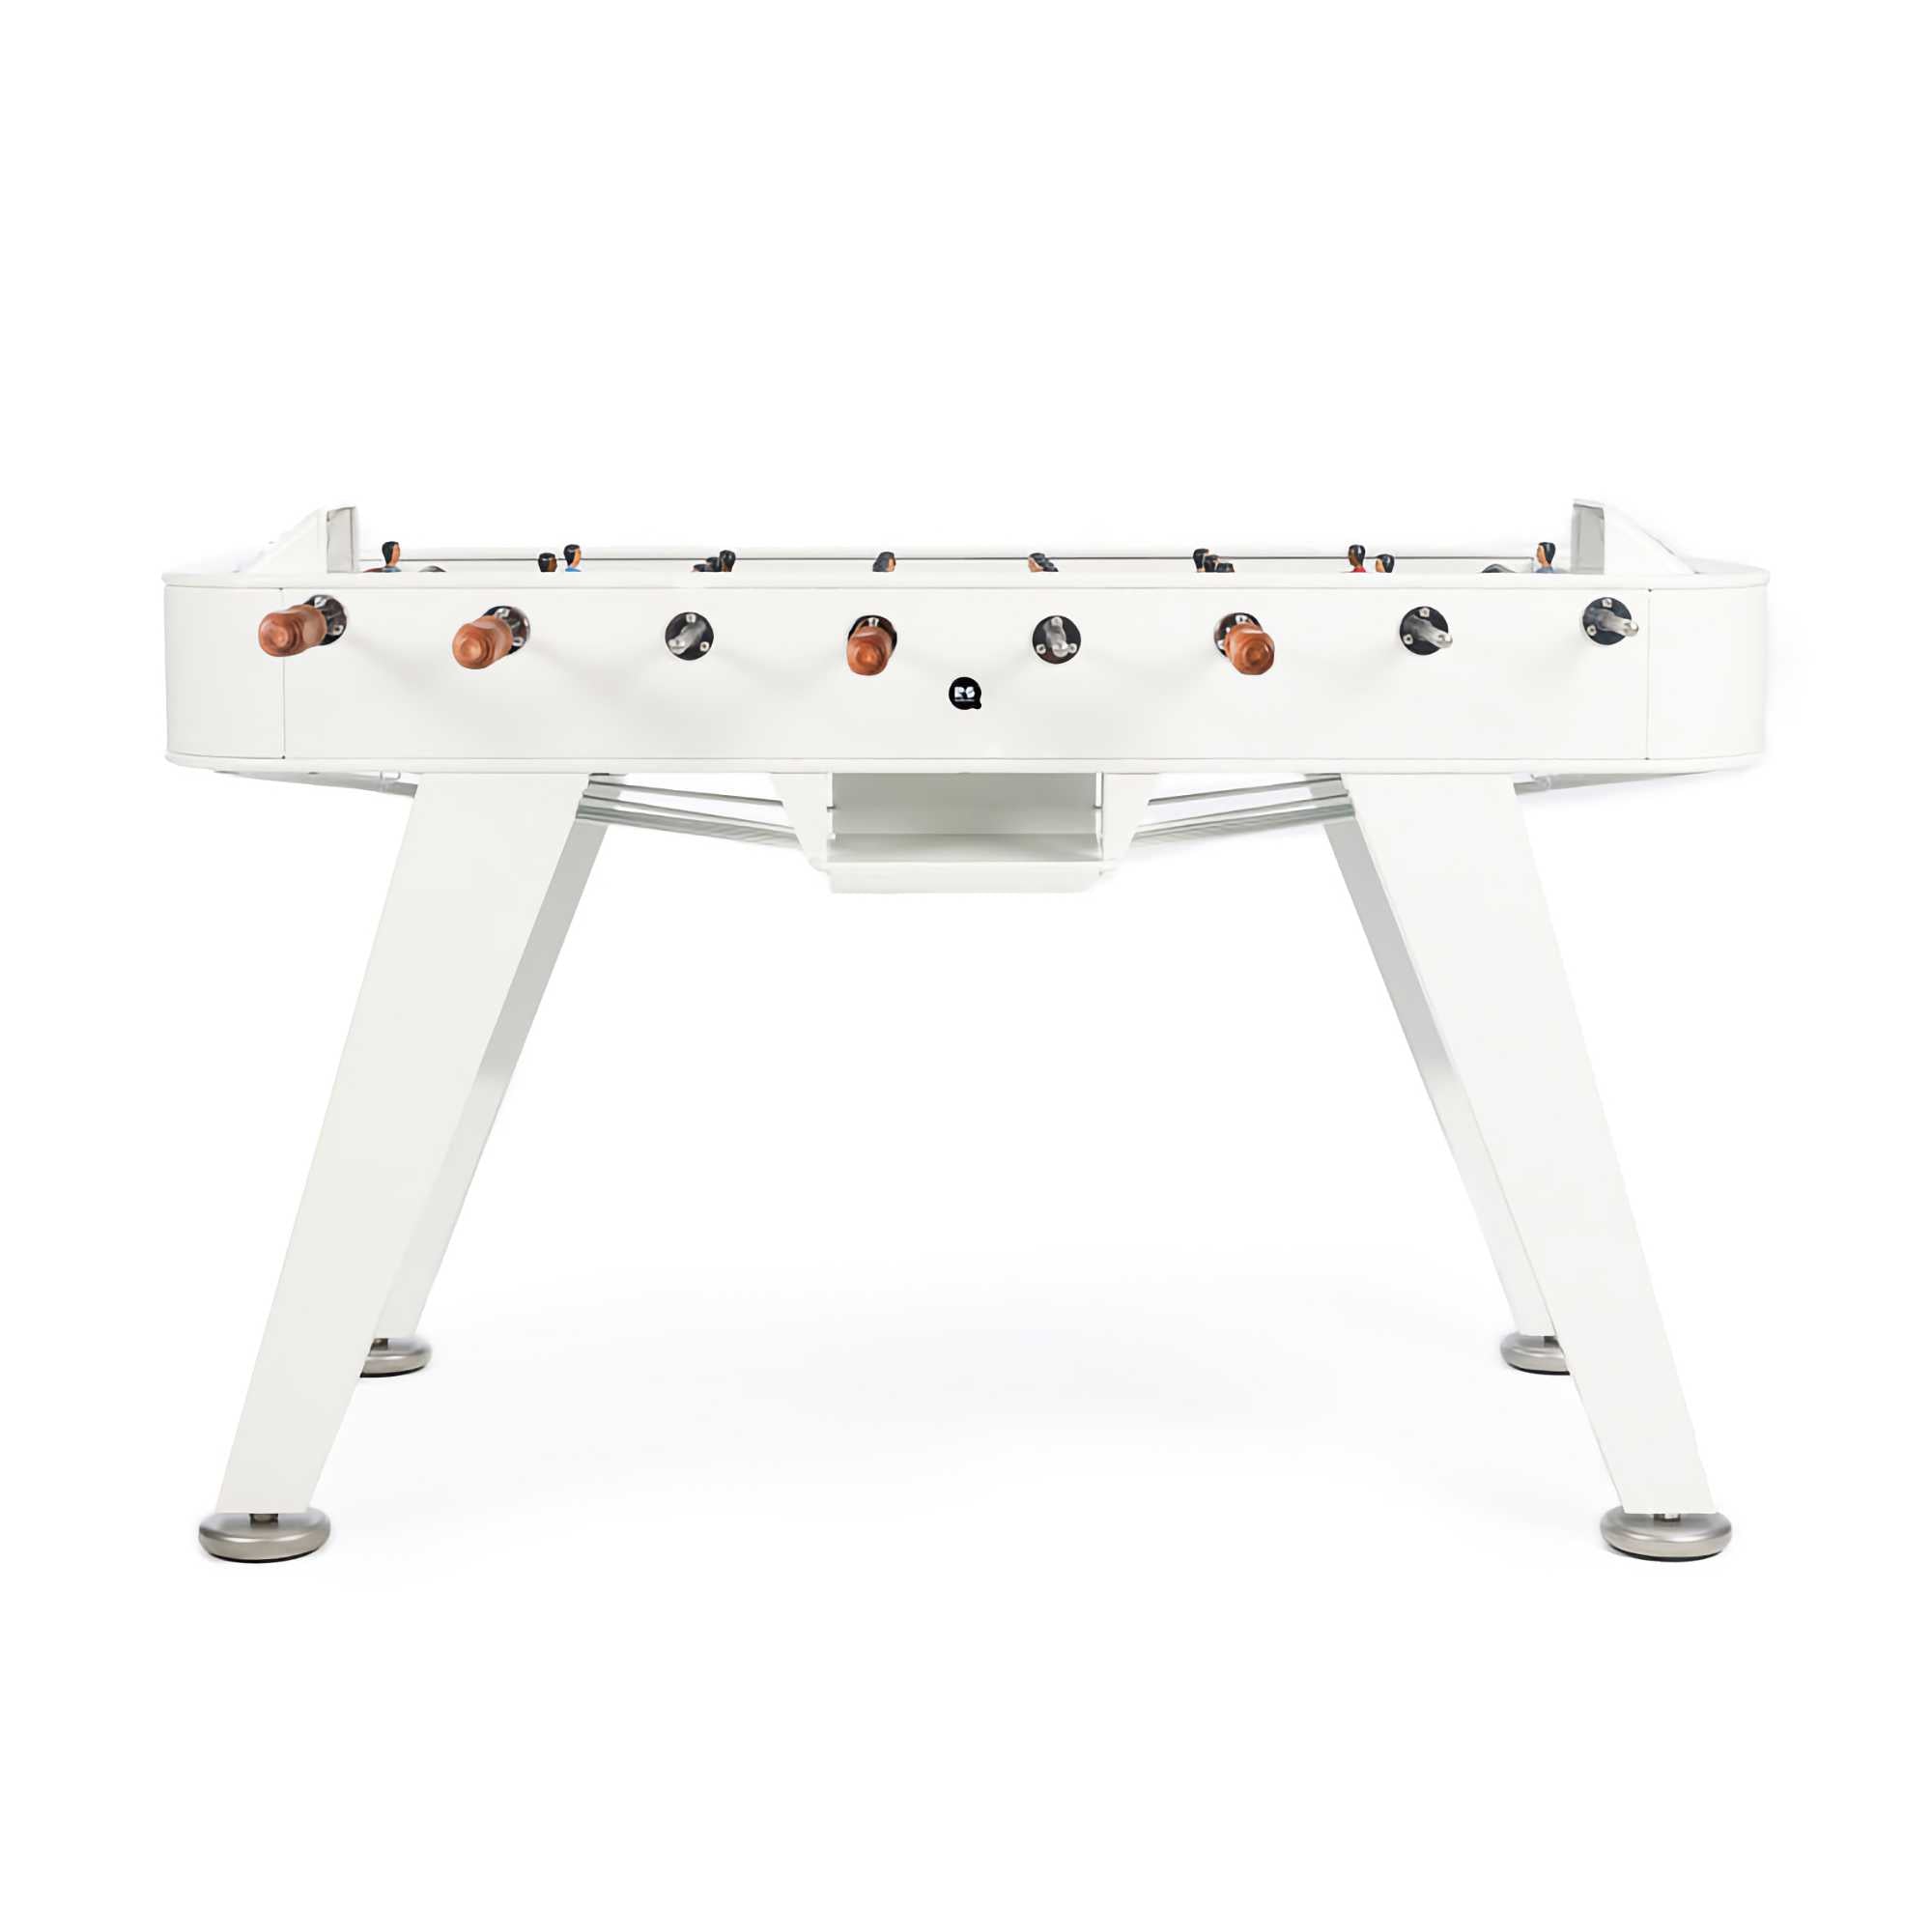 RS#2 football table Outdoor, white